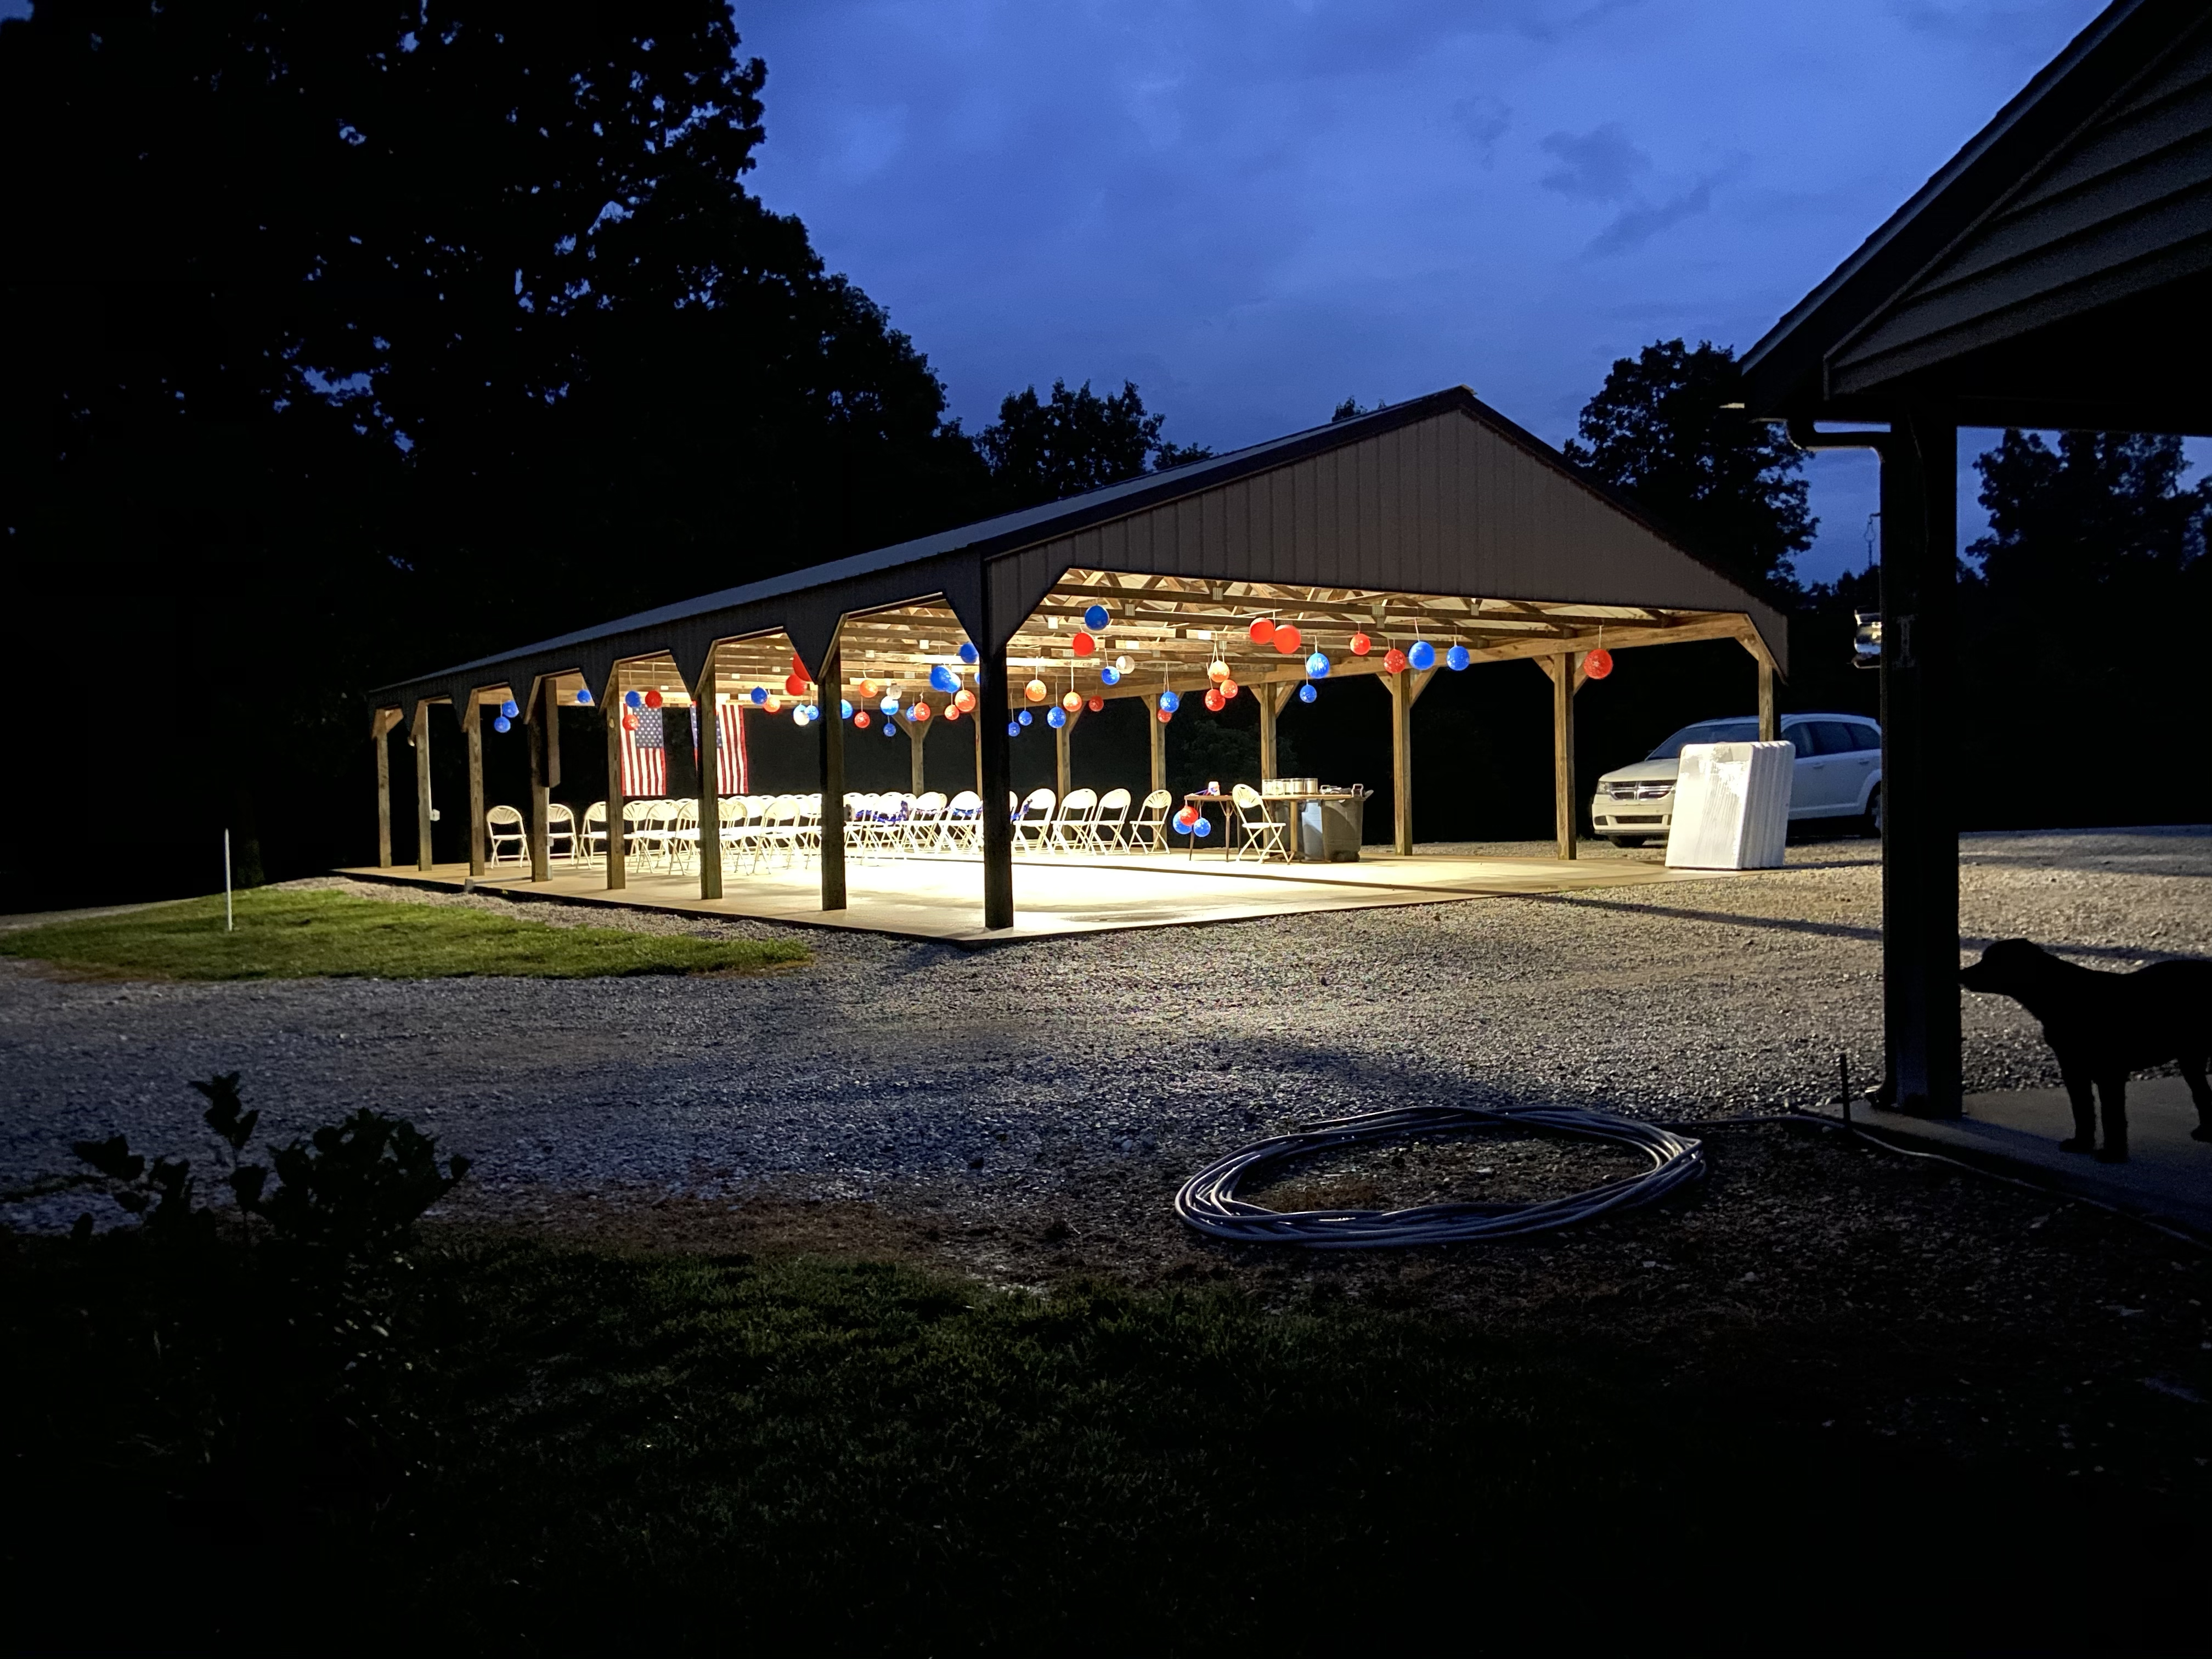 Twains Vineyard - outdoor photo, nighttime, of a large pavilion with lights and decorations.